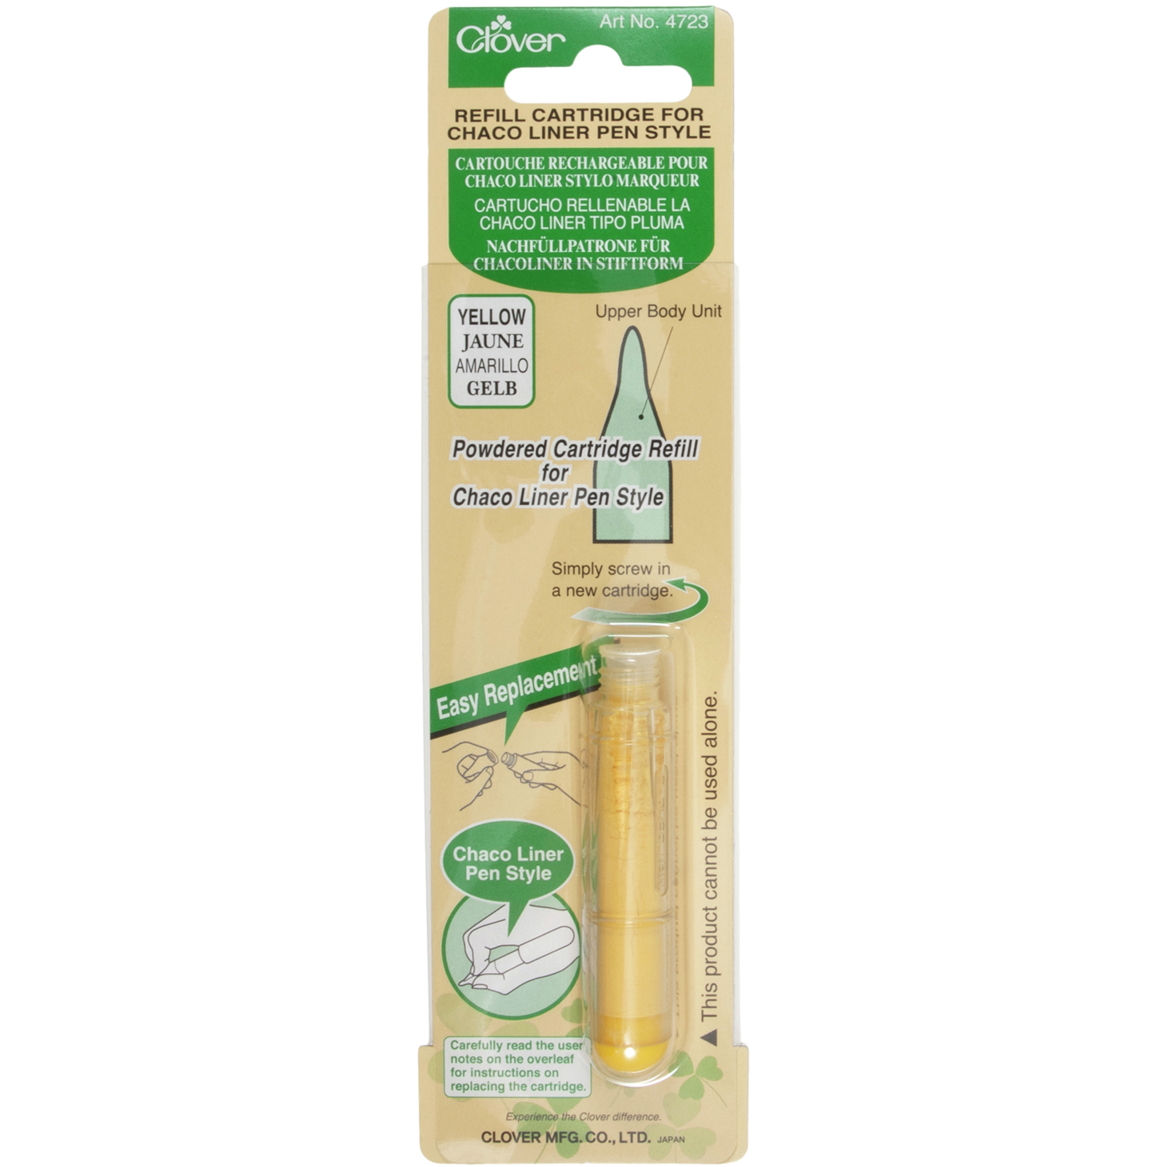 Clover Refill Cartridge for Chaco Liner Yellow